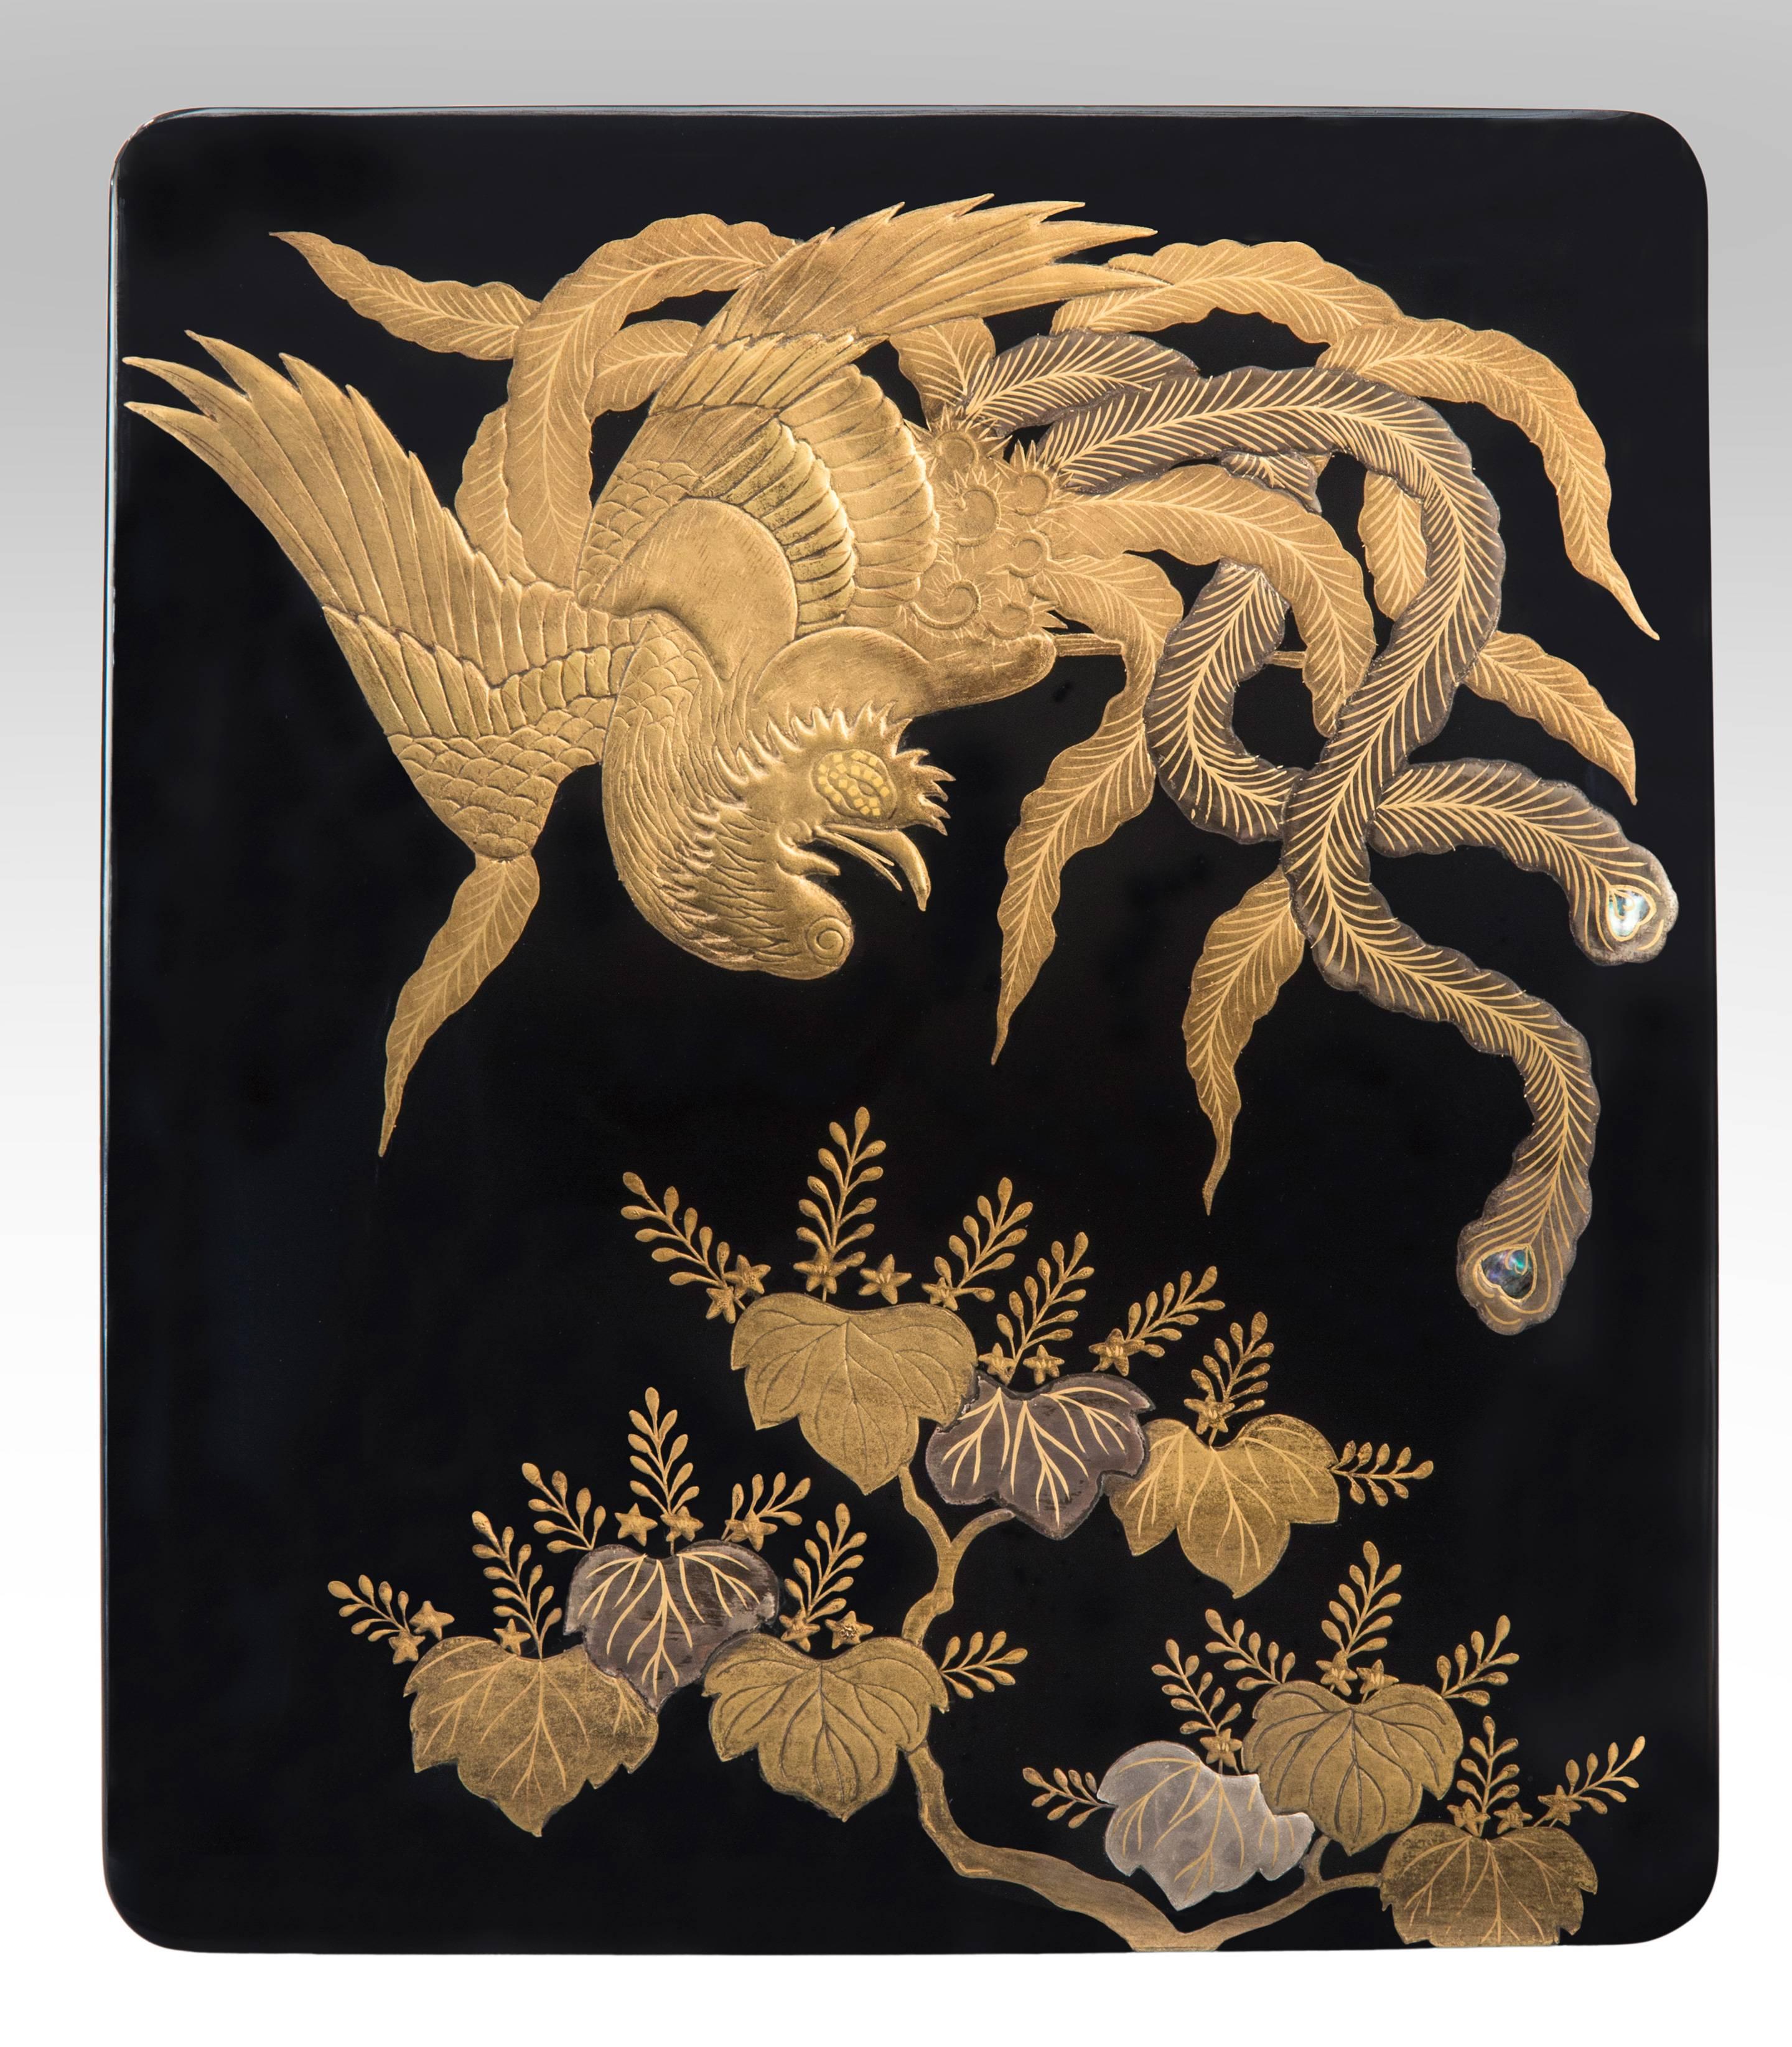 Japanese lacquerware writing box with a phoenix motif
Meiji period, late 19th century or early 20th century.
The rectangular top depicting a golden phoenix with mother-of-pearl inlays, floating above mulberry leaves against a black lacquer